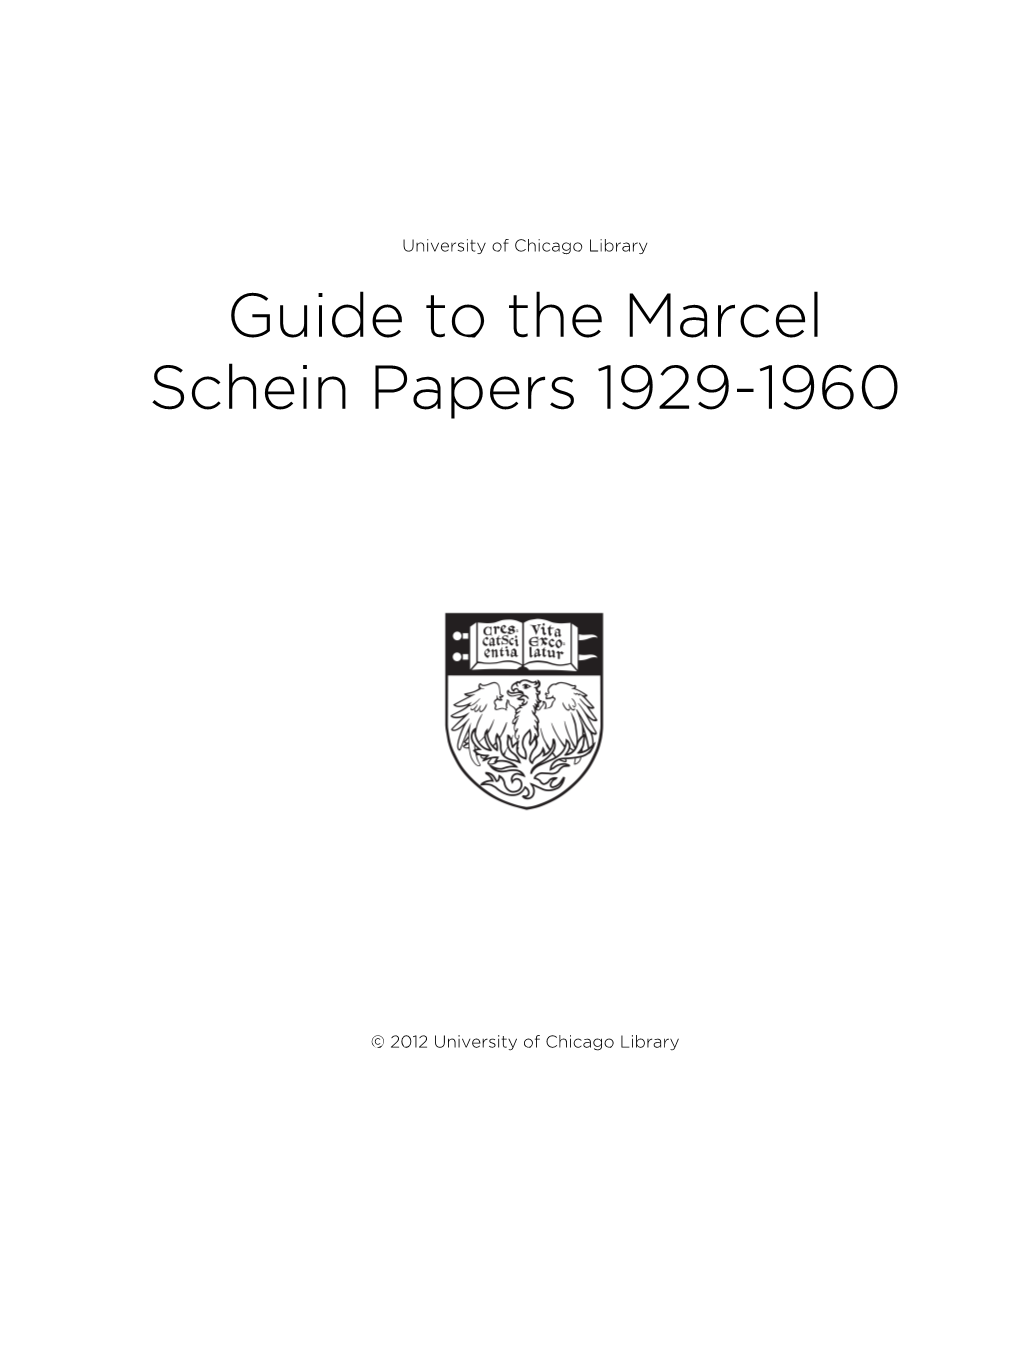 Guide to the Marcel Schein Papers 1929-1960